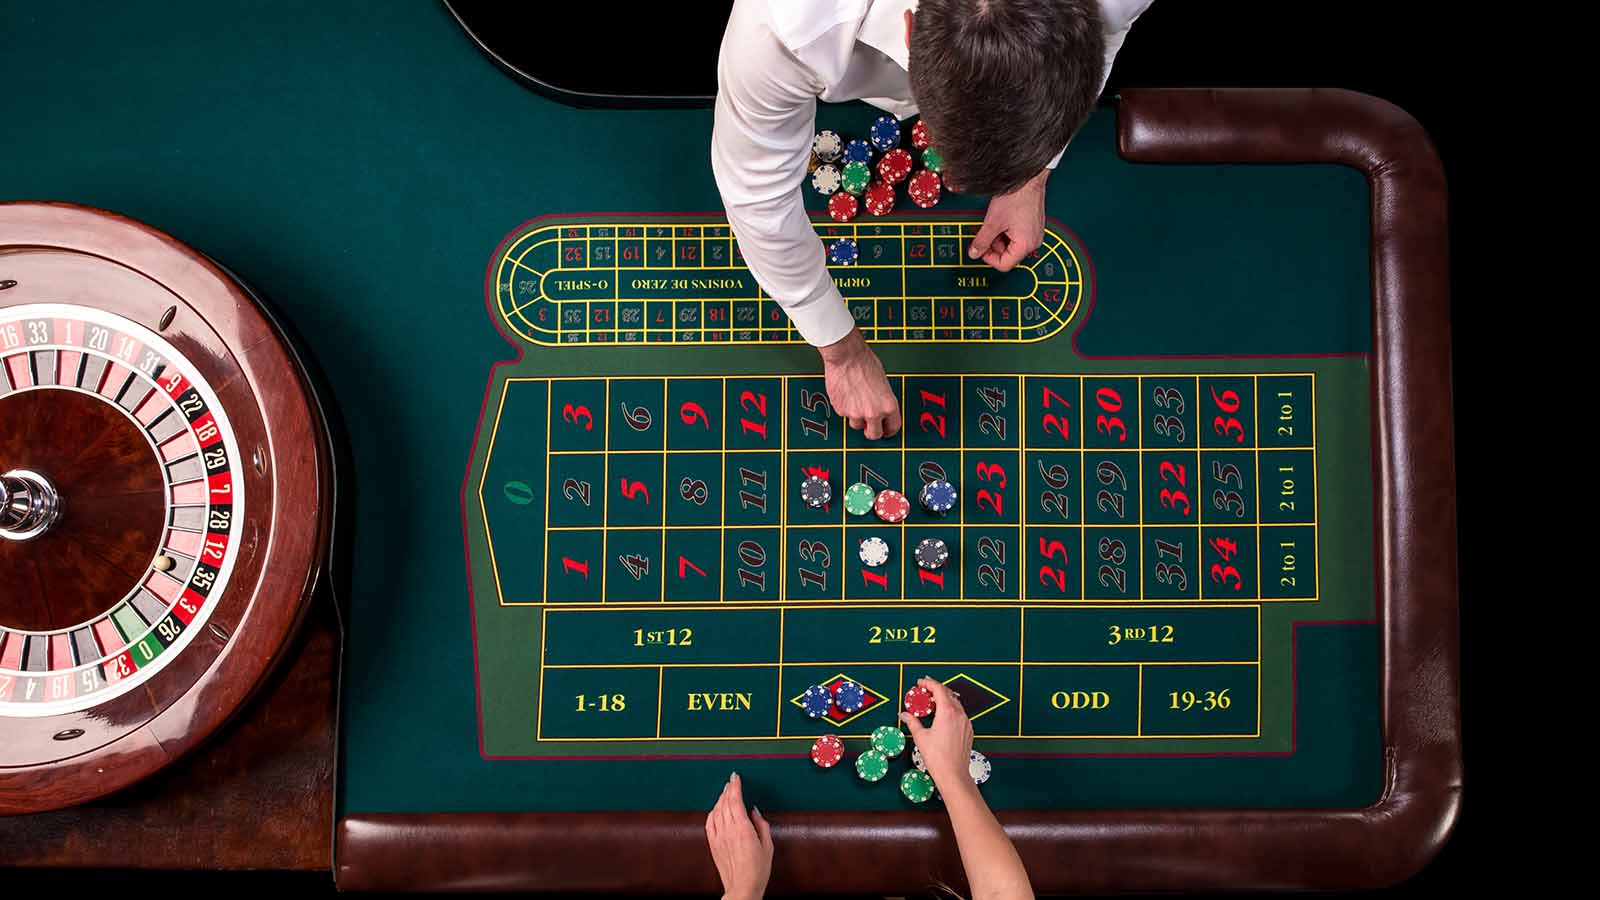 How to win at Roulette – The starting point